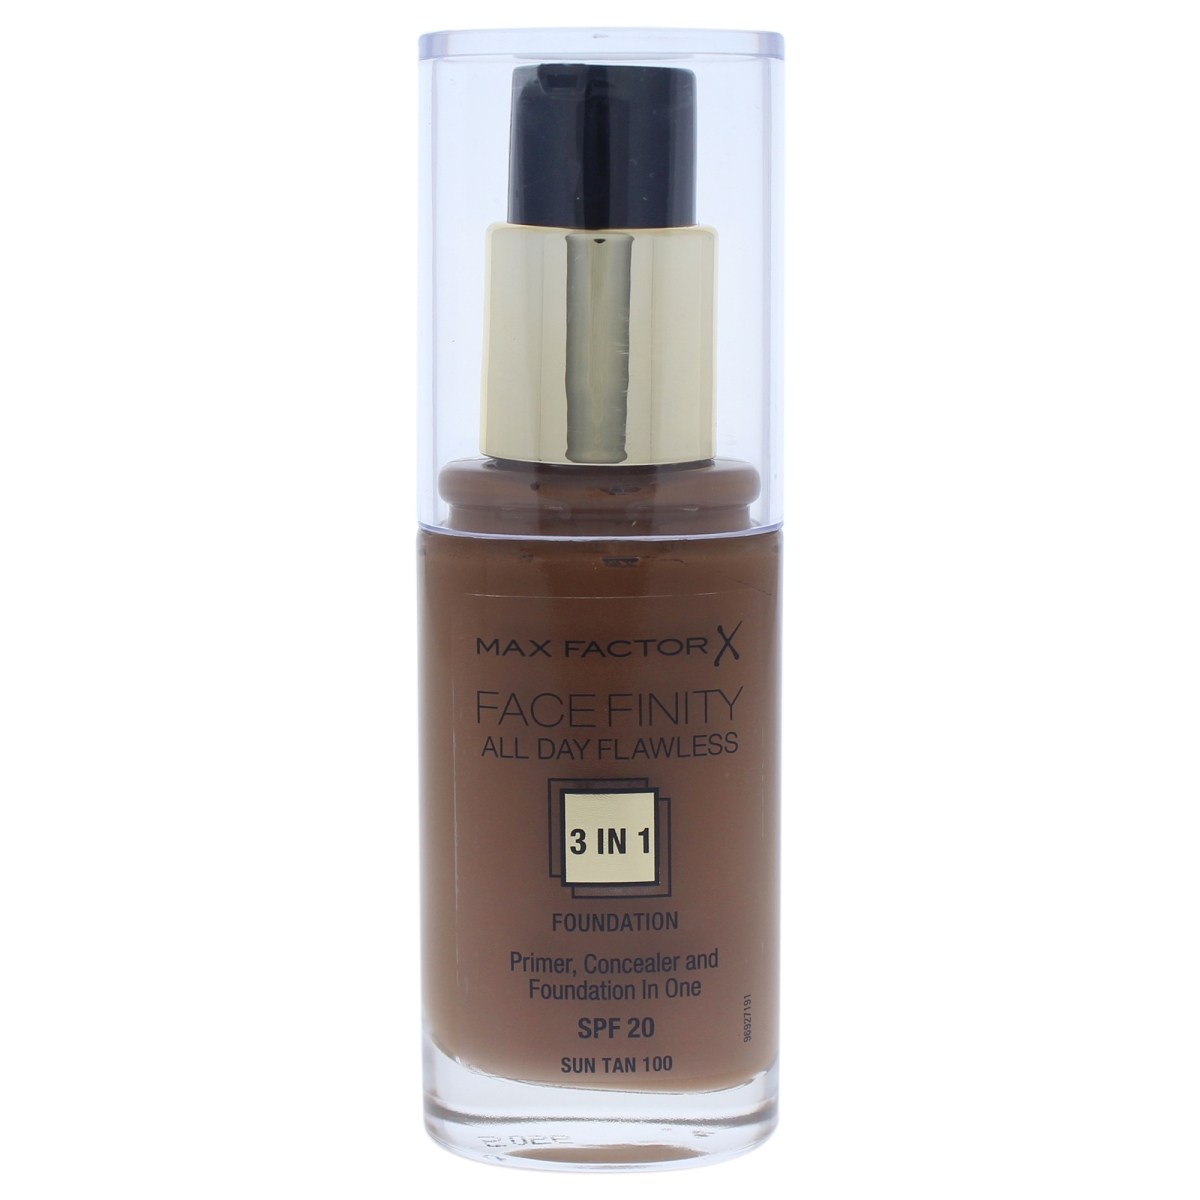 W-c-11236 30 Ml No. 100 Spf20 Facefinity All Day Flawless 3-in-1 Foundation - Sun Tan For Women